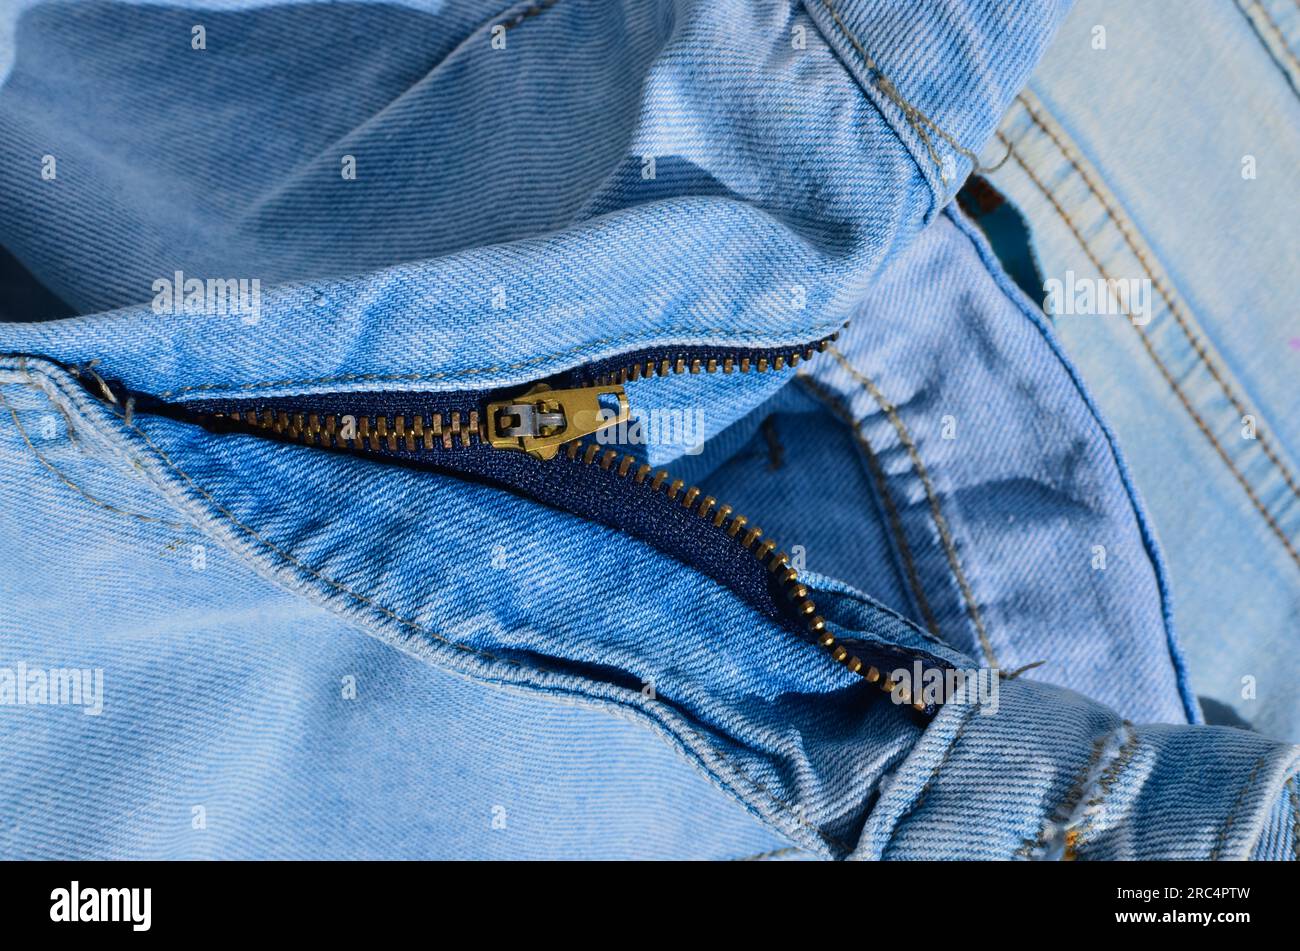 Close-up of jeans stitching, highlighting tough and durable lines. Indispensable for projects related to fashion and clothing. Jeans with zipper. Stock Photo